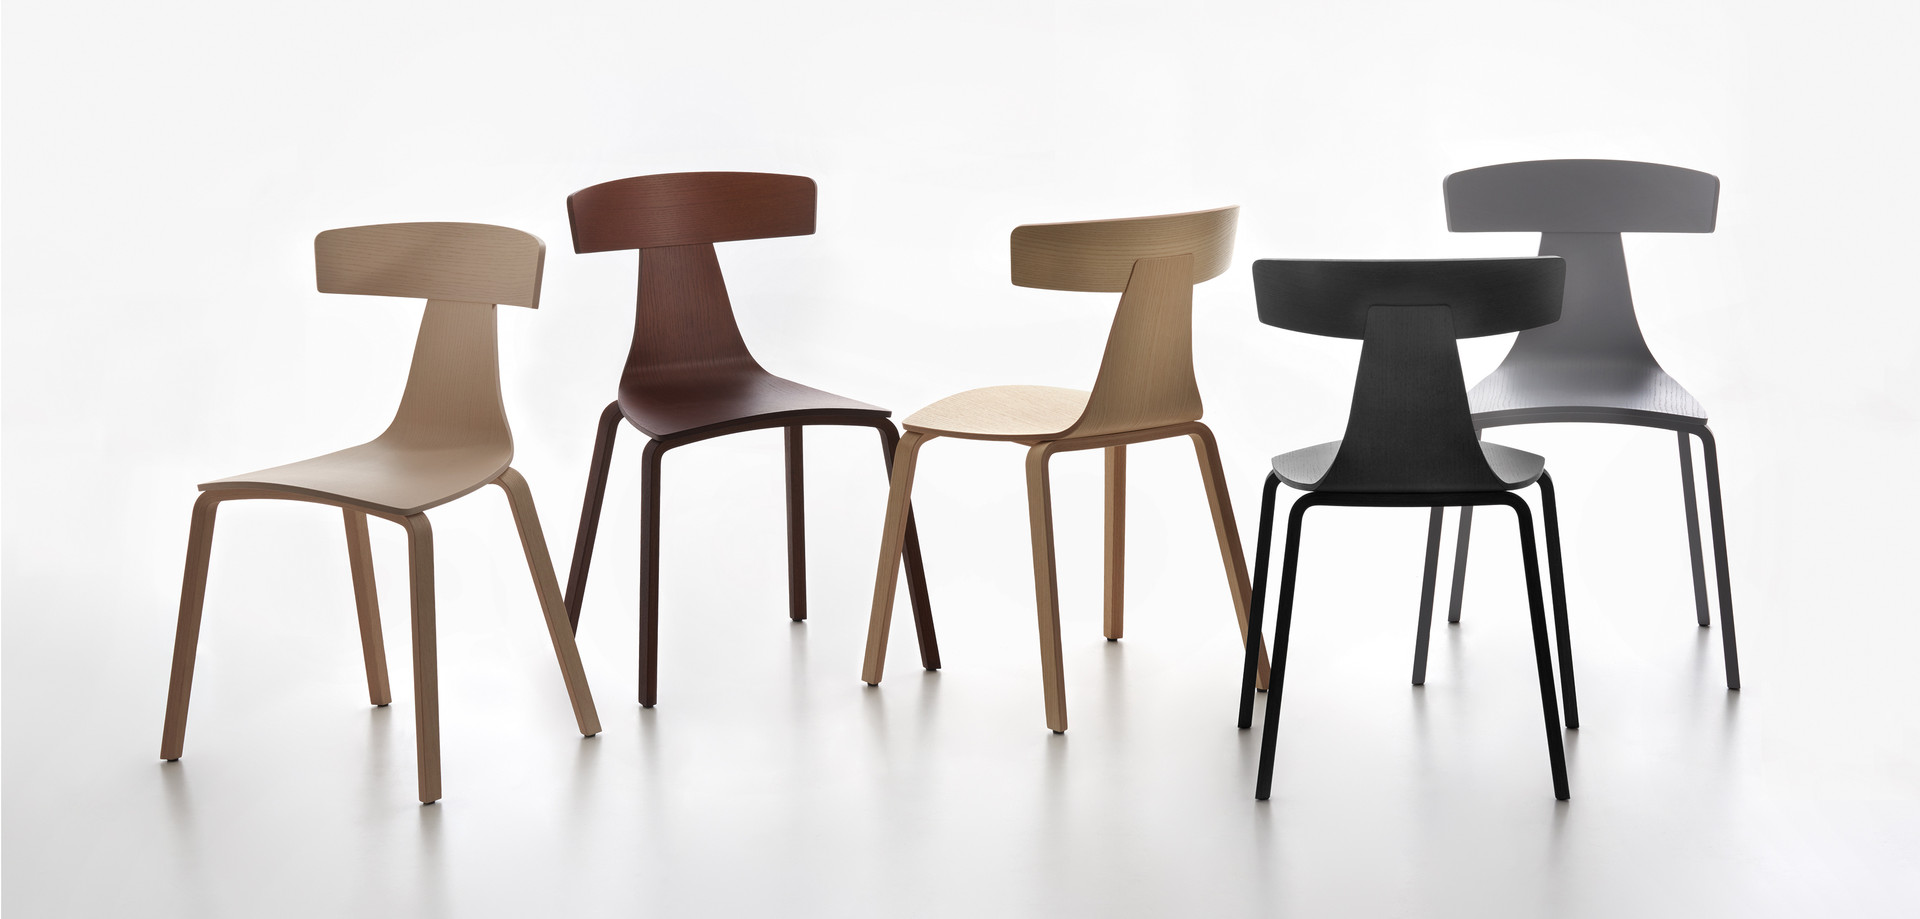 Plank - REMO wood chair, natural finished ash, stained in the colors chalk, walnut, grey, black.